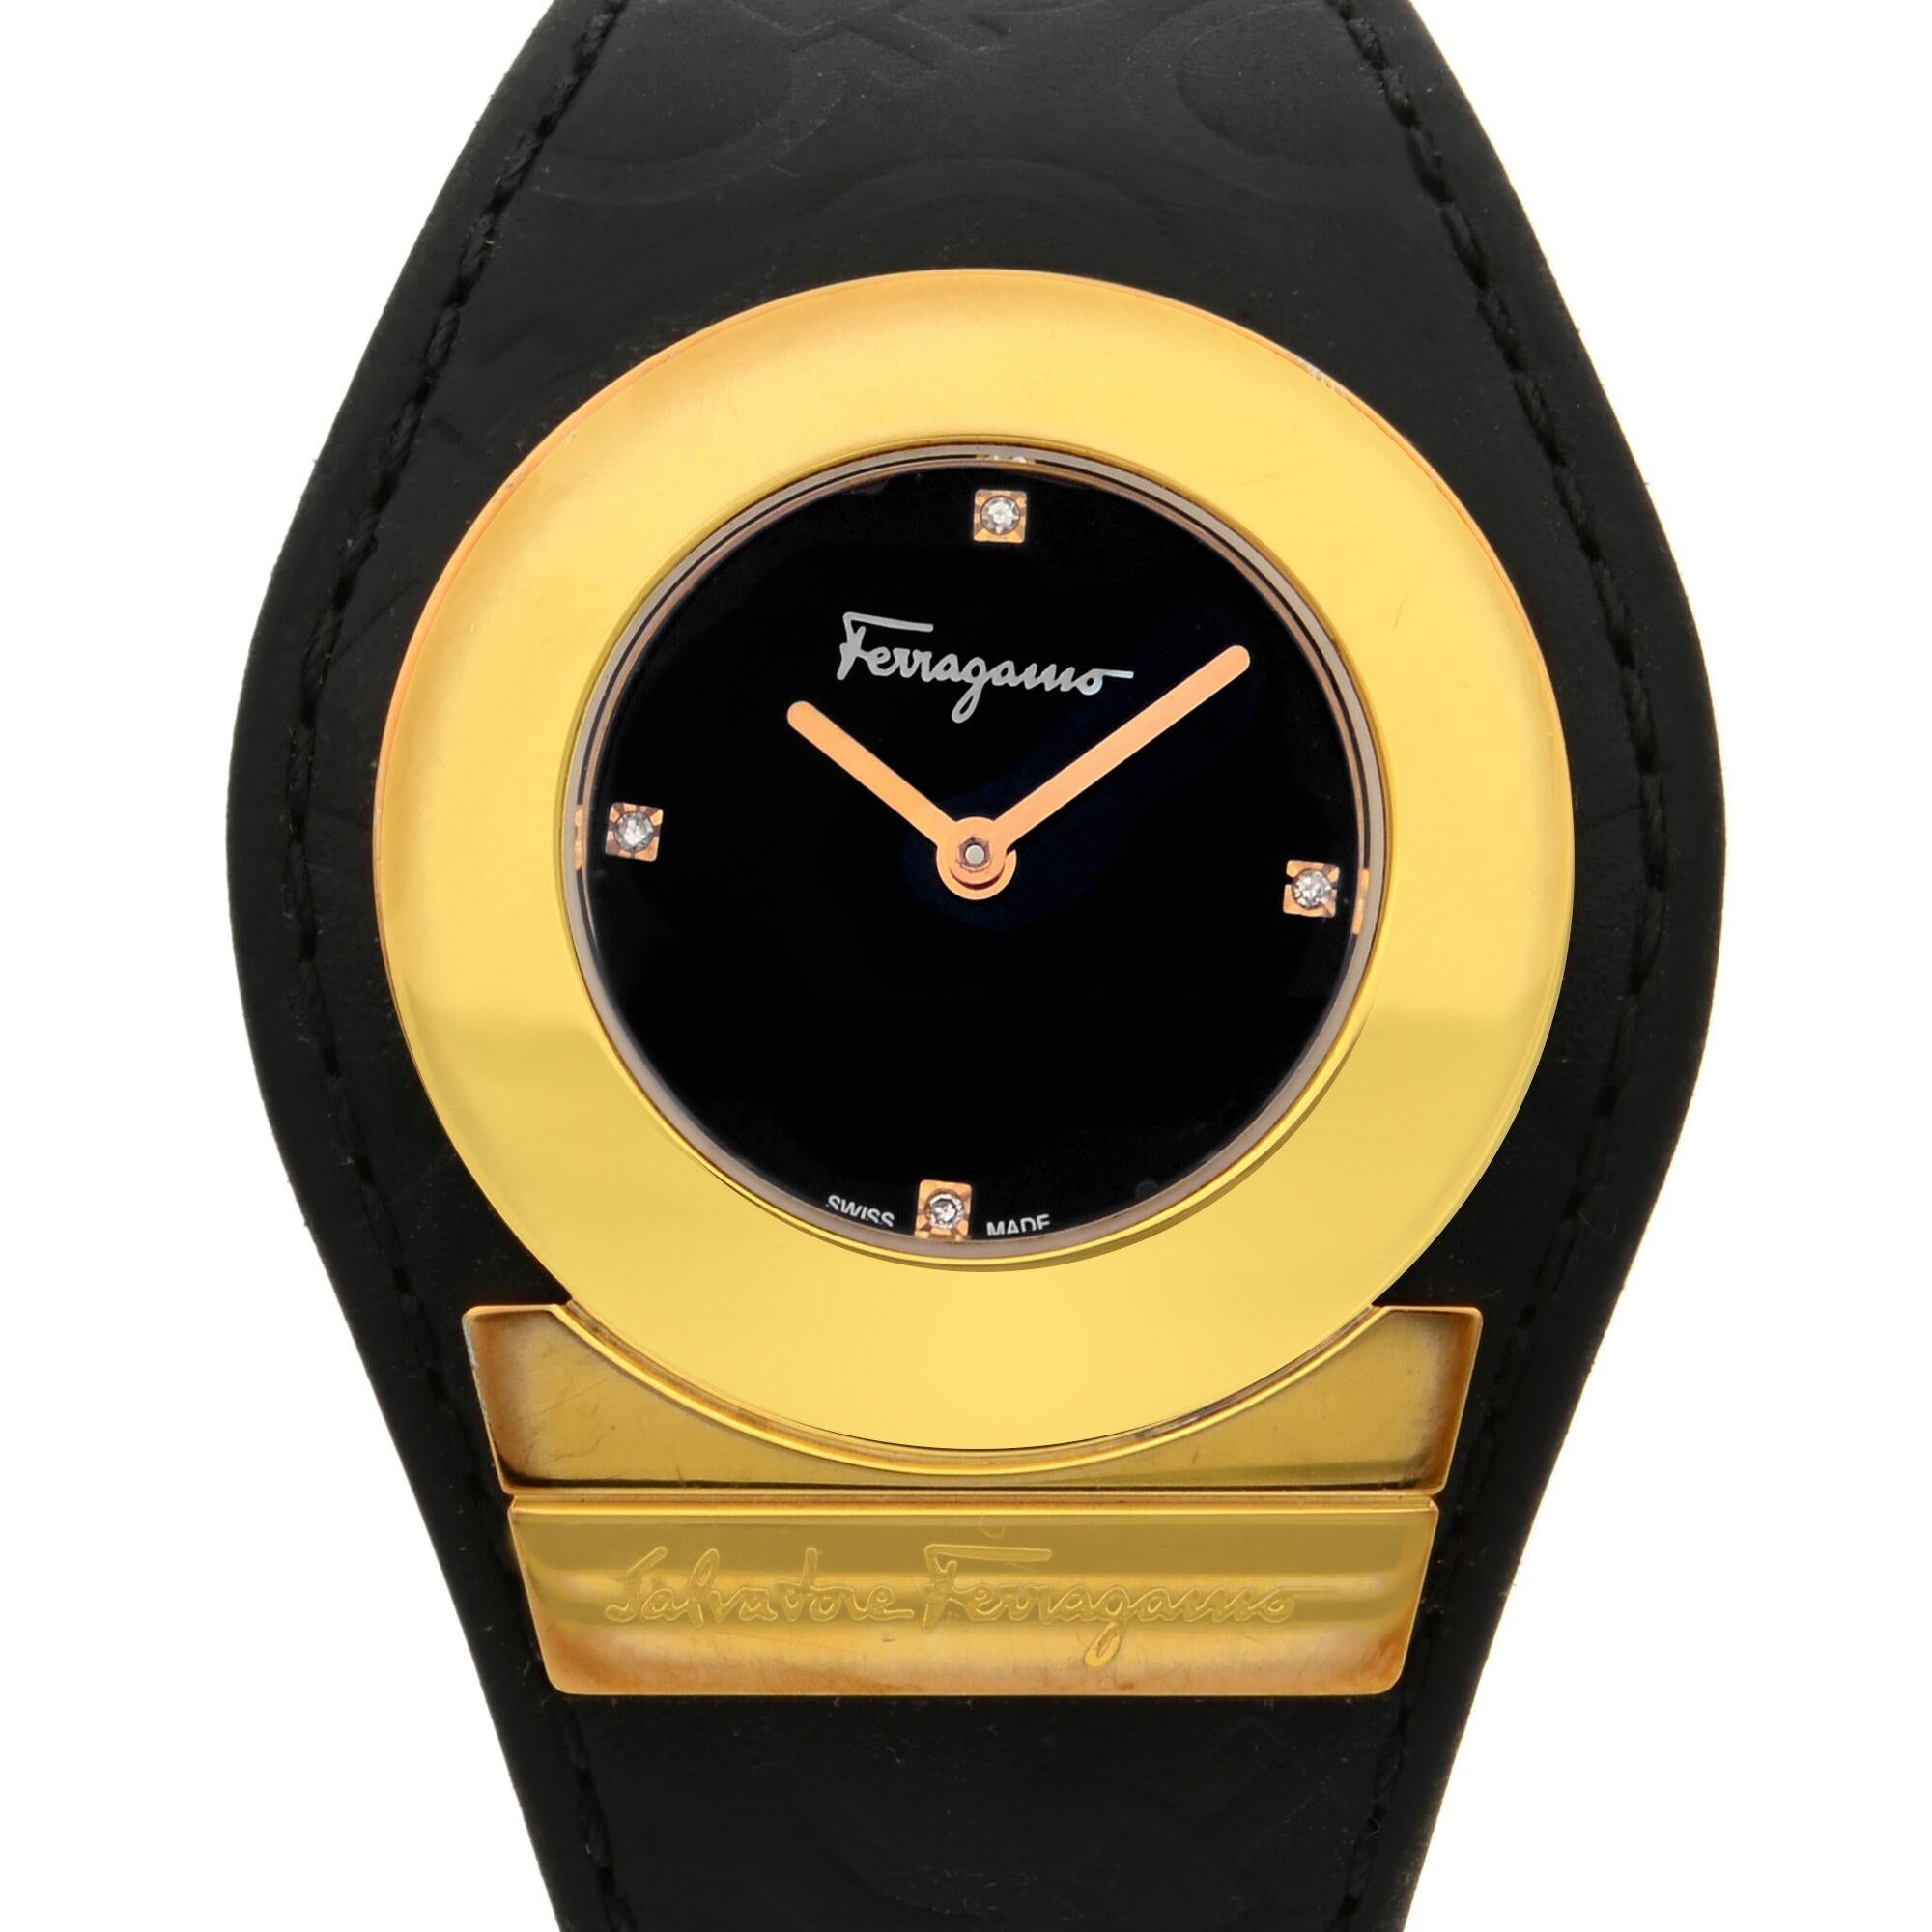 This pre-owned Salvatore Ferragamo Firenze F61SBQ5009I is a beautiful Ladie's timepiece that is powered by quartz (battery) movement which is cased in a stainless steel case. It has a round shape face, diamonds dial and has hand diamonds style